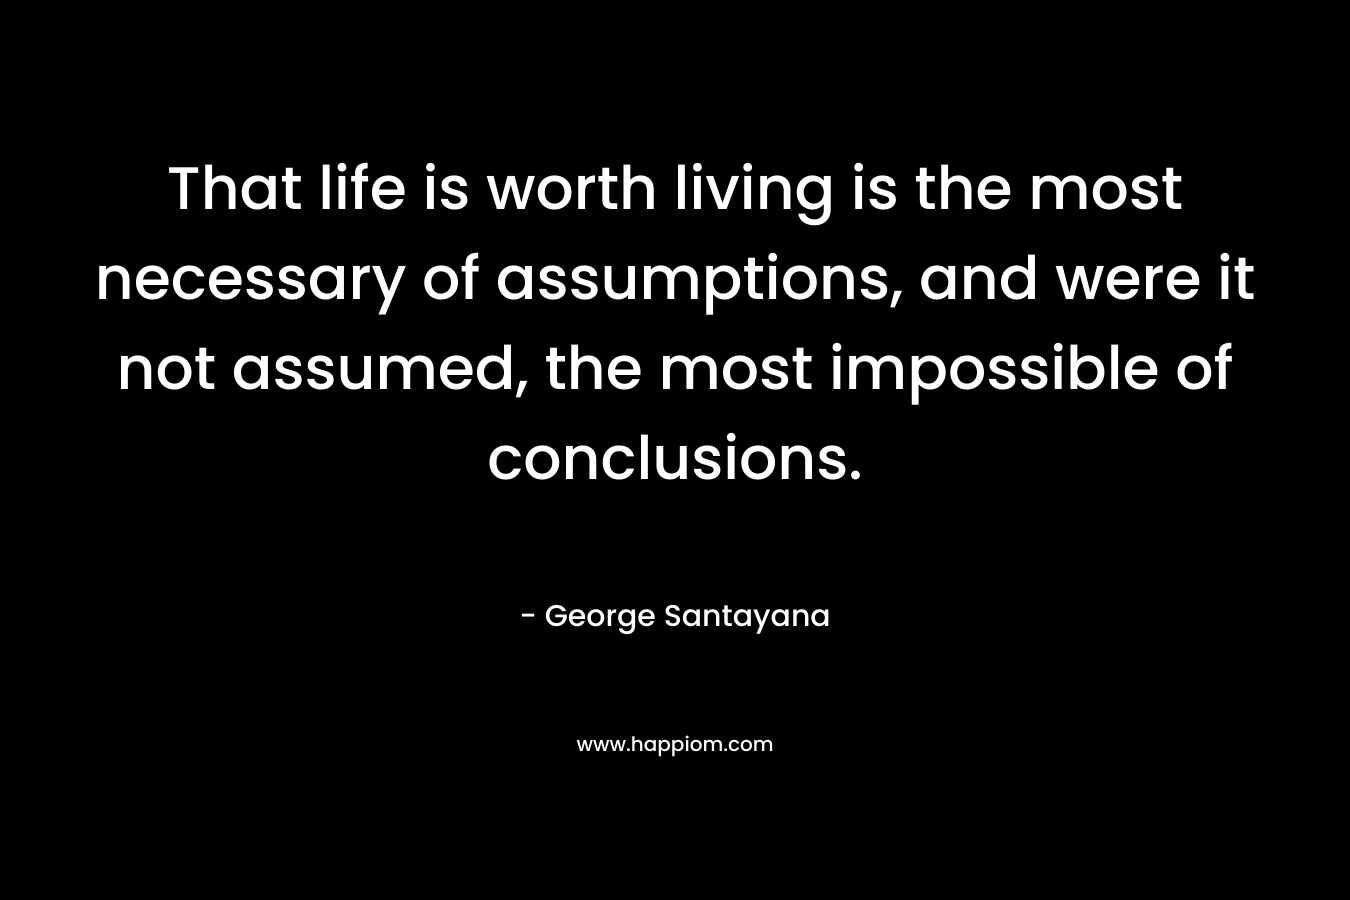 That life is worth living is the most necessary of assumptions, and were it not assumed, the most impossible of conclusions. – George Santayana